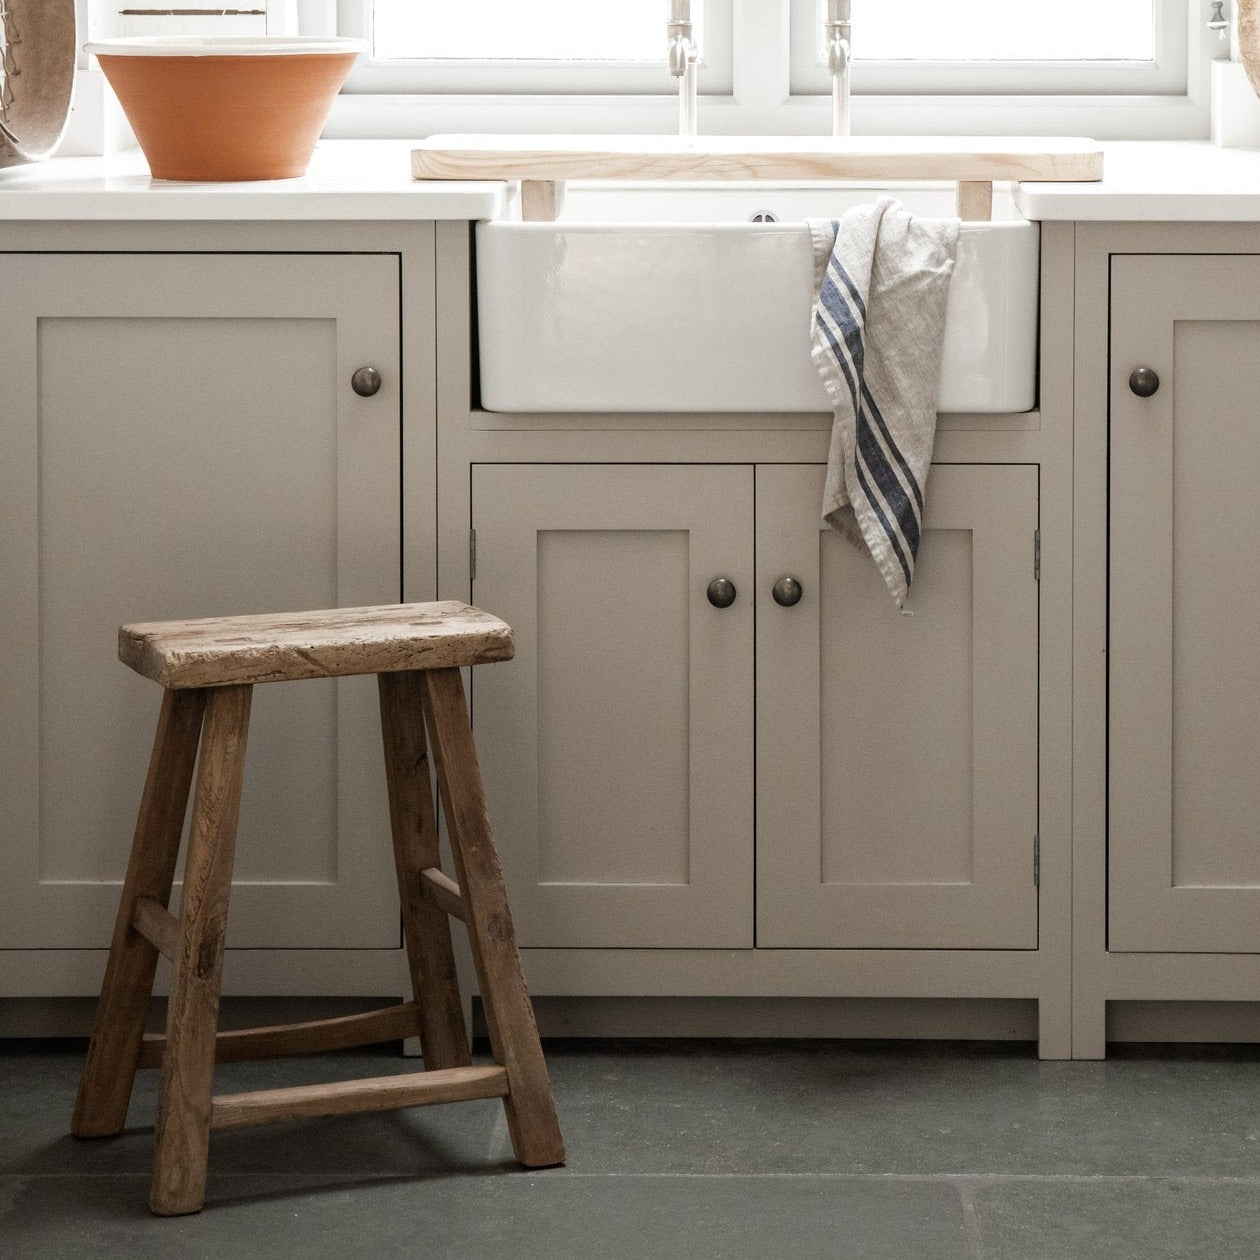 A neutral shaker style kitchen with white sink and small rustic wooden stool.